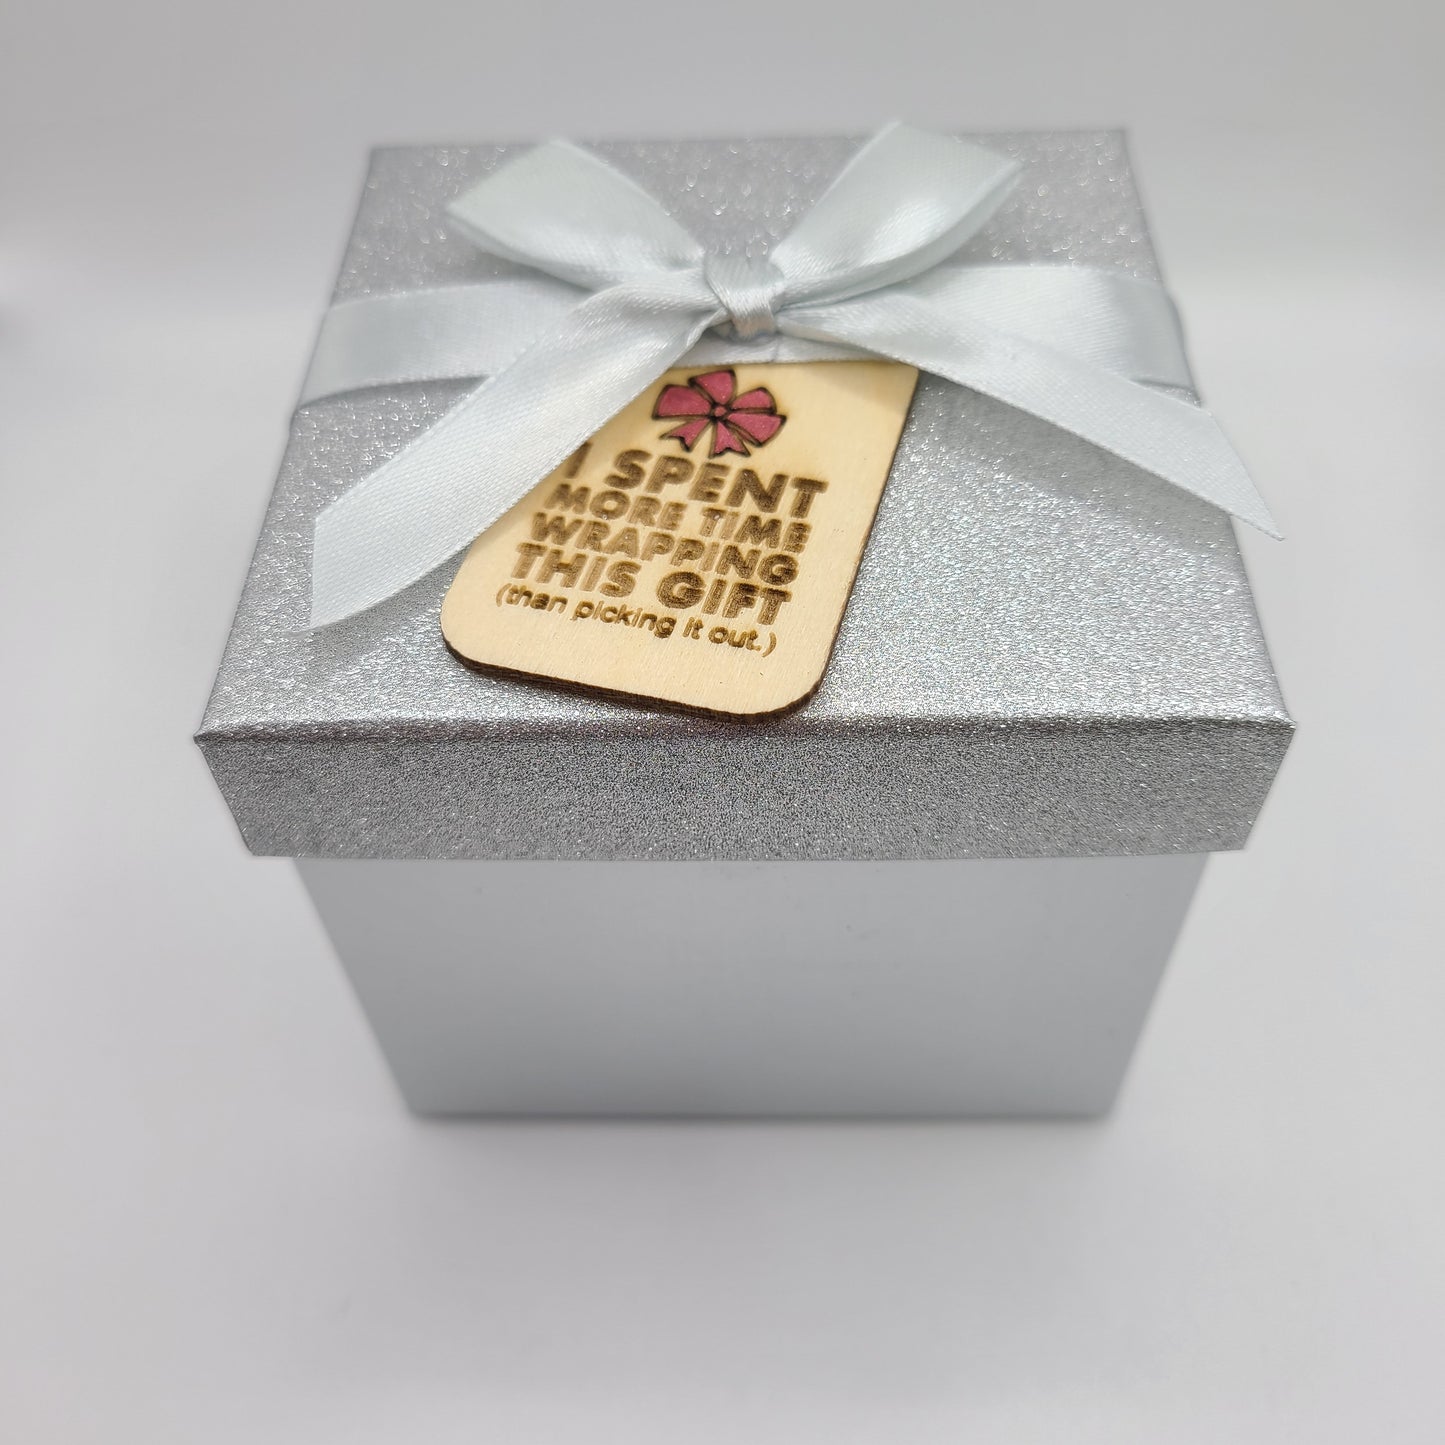 "I Spent More TIme Wrapping This Gift" Gift Tag